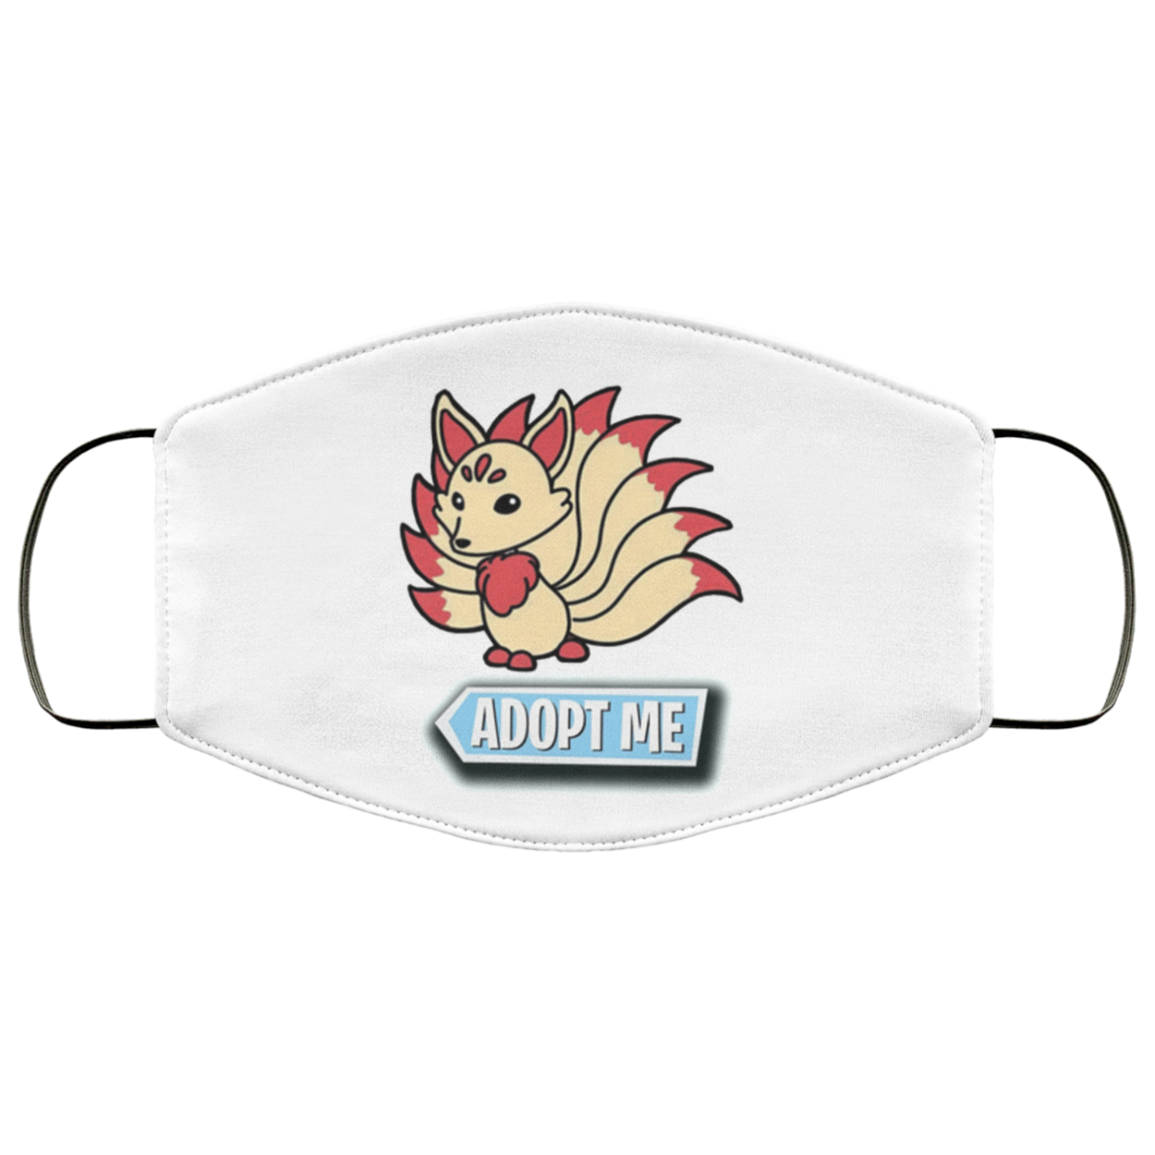 Kitsune Adopt Me Roblox Roblox Game Adopt Me Characters Face Mask Q Finder Trending Design T Shirt - face mask roblox